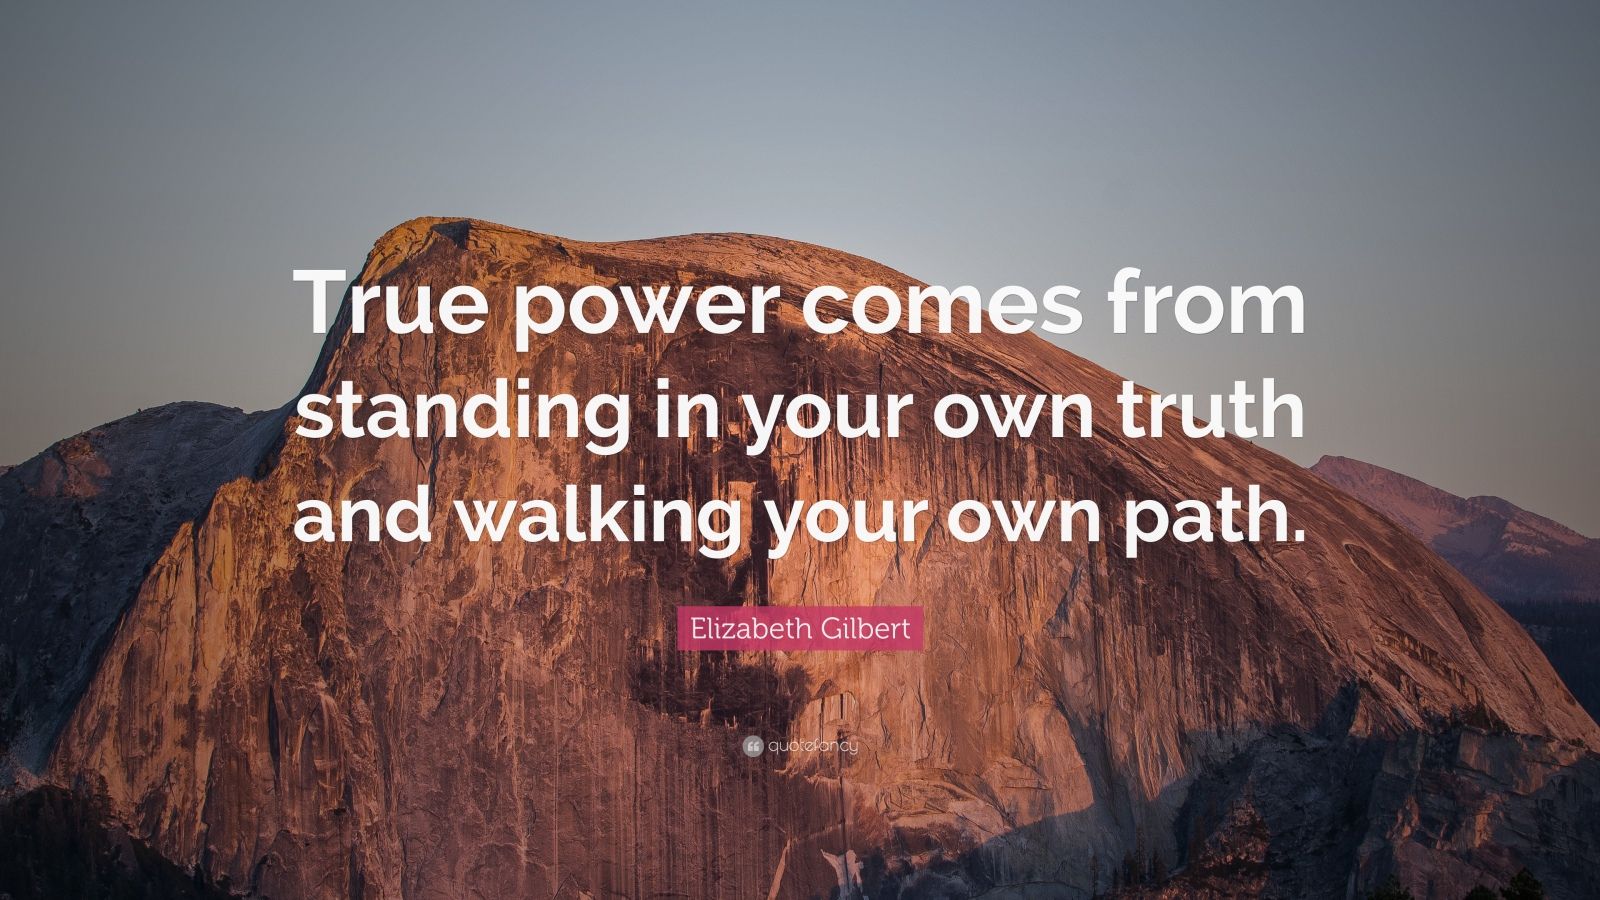 Elizabeth Gilbert Quote: “True power comes from standing in your own